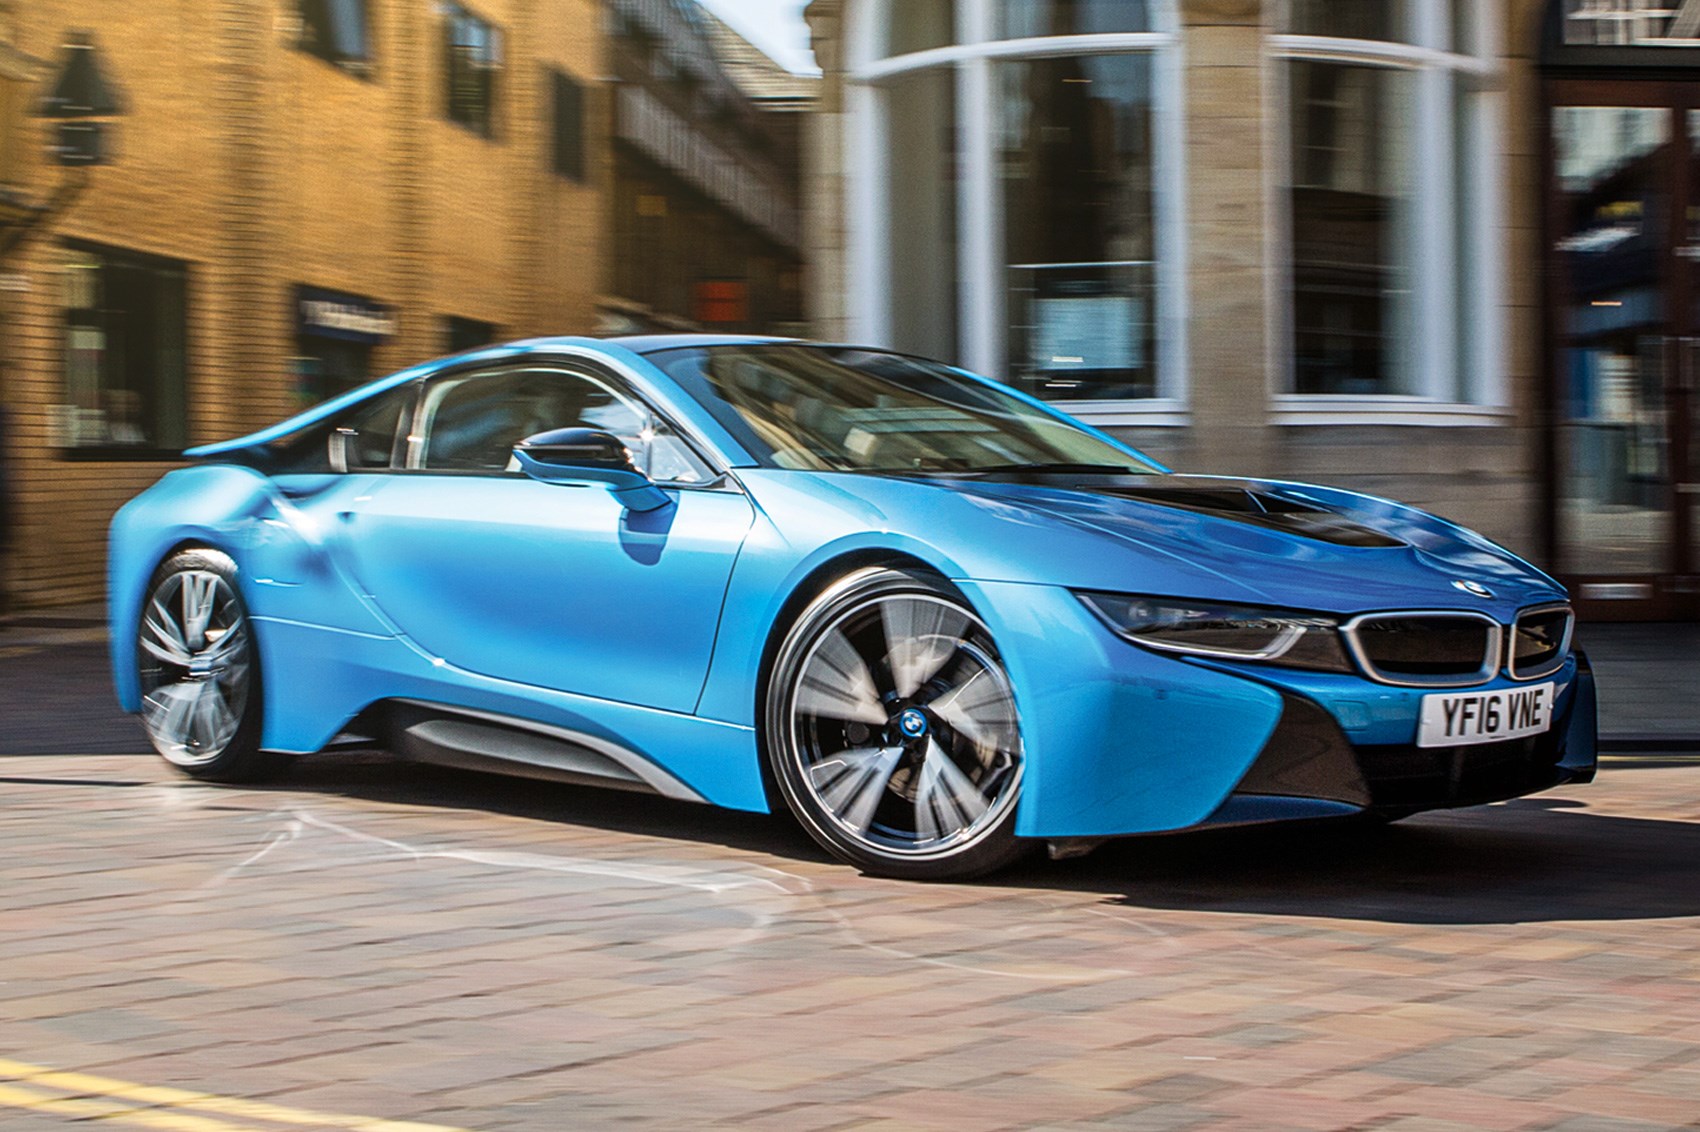 2020 BMW i8 Price, Value, Ratings & Reviews